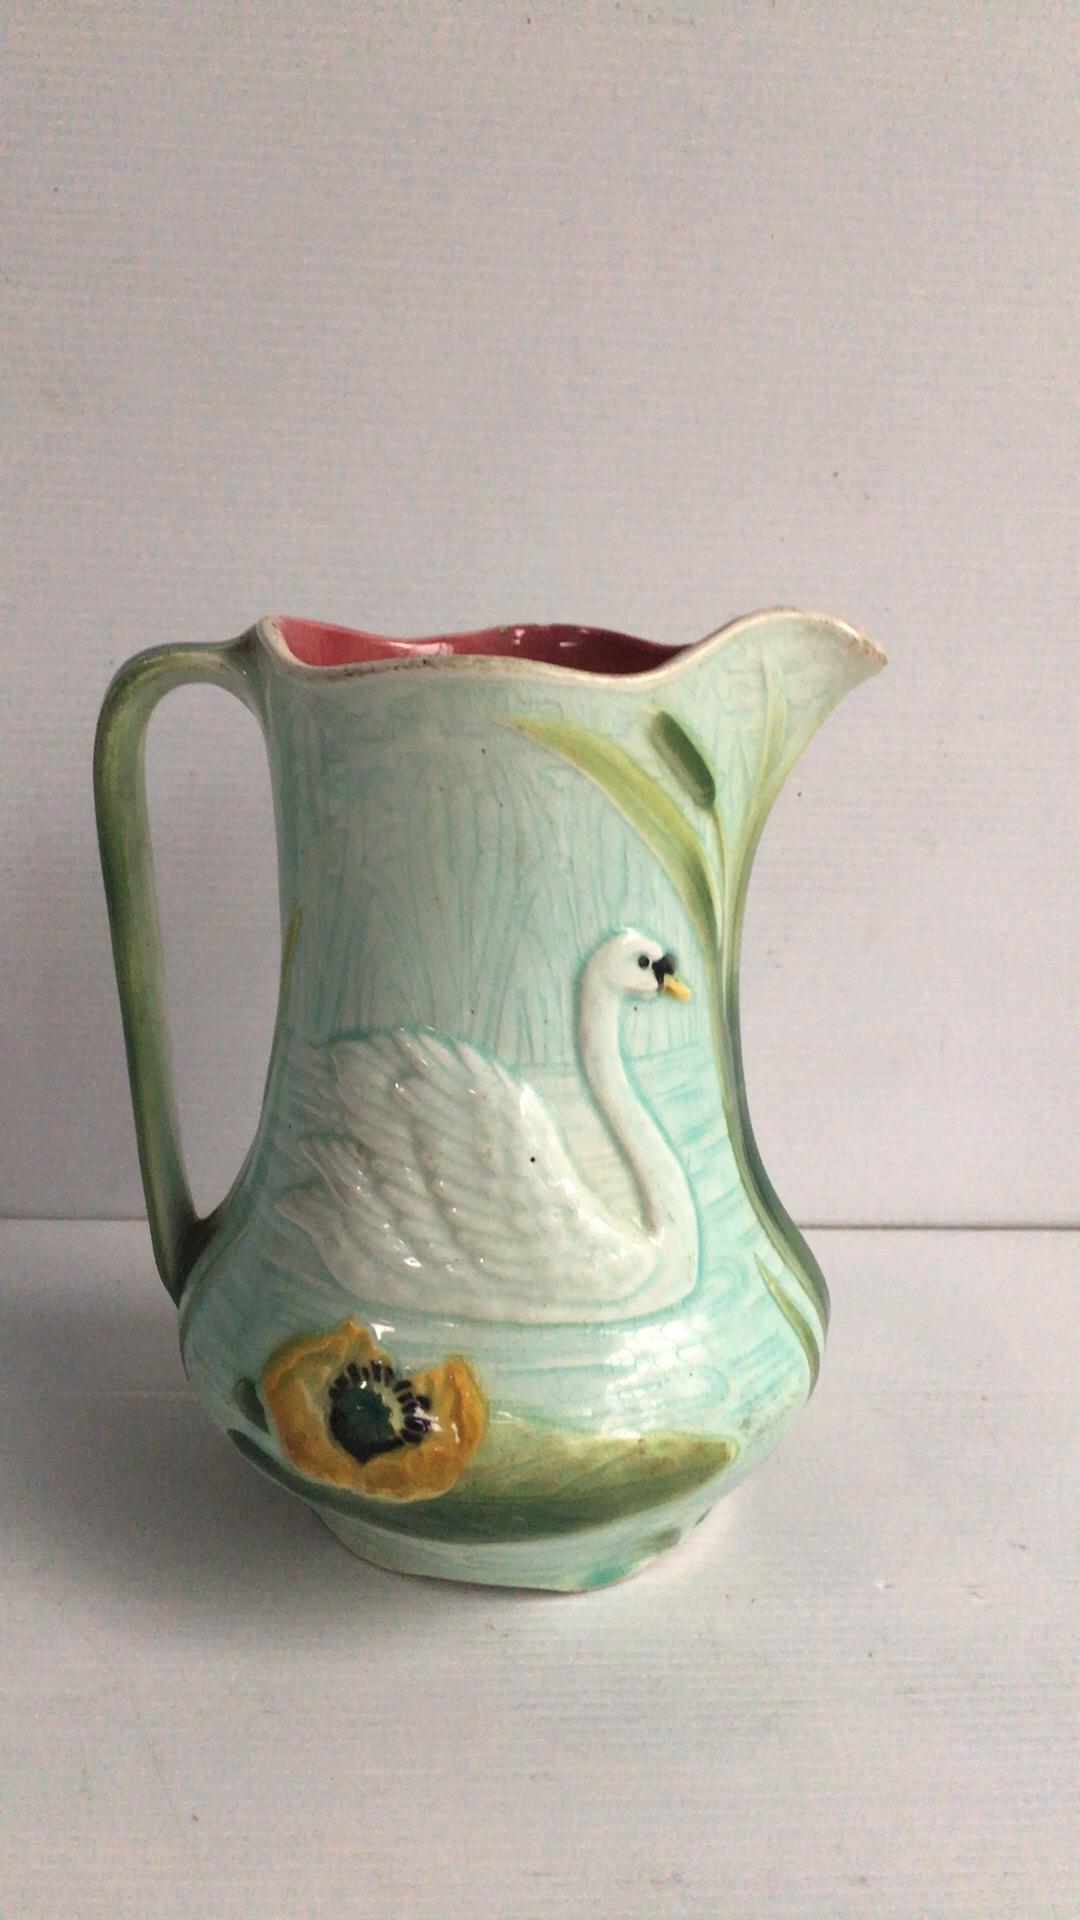 French Majolica pitcher with swan and water lilies Keller & Guerin Saint Clément, circa 1900.
Measures: Height 6.8 inches, length 6